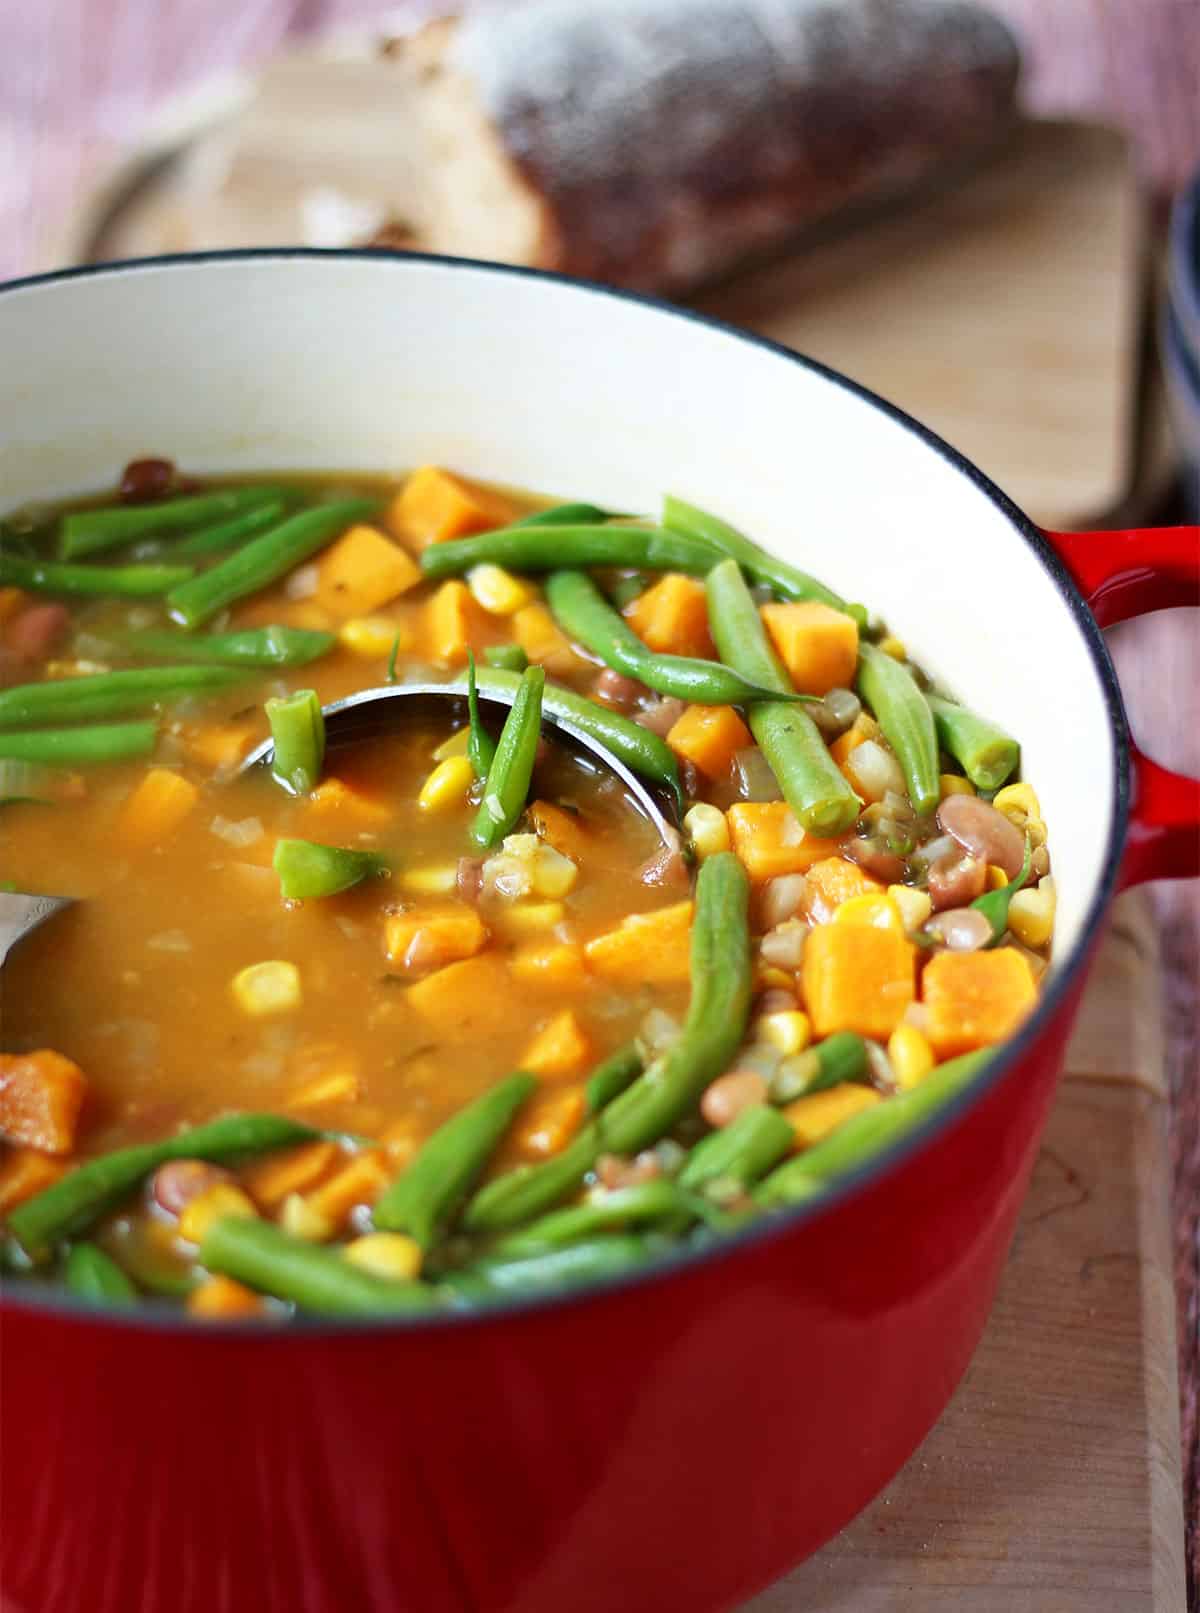 A pot of stew with green beans, pinto beans, sweet potatoes, and pinto beans with a ladle.